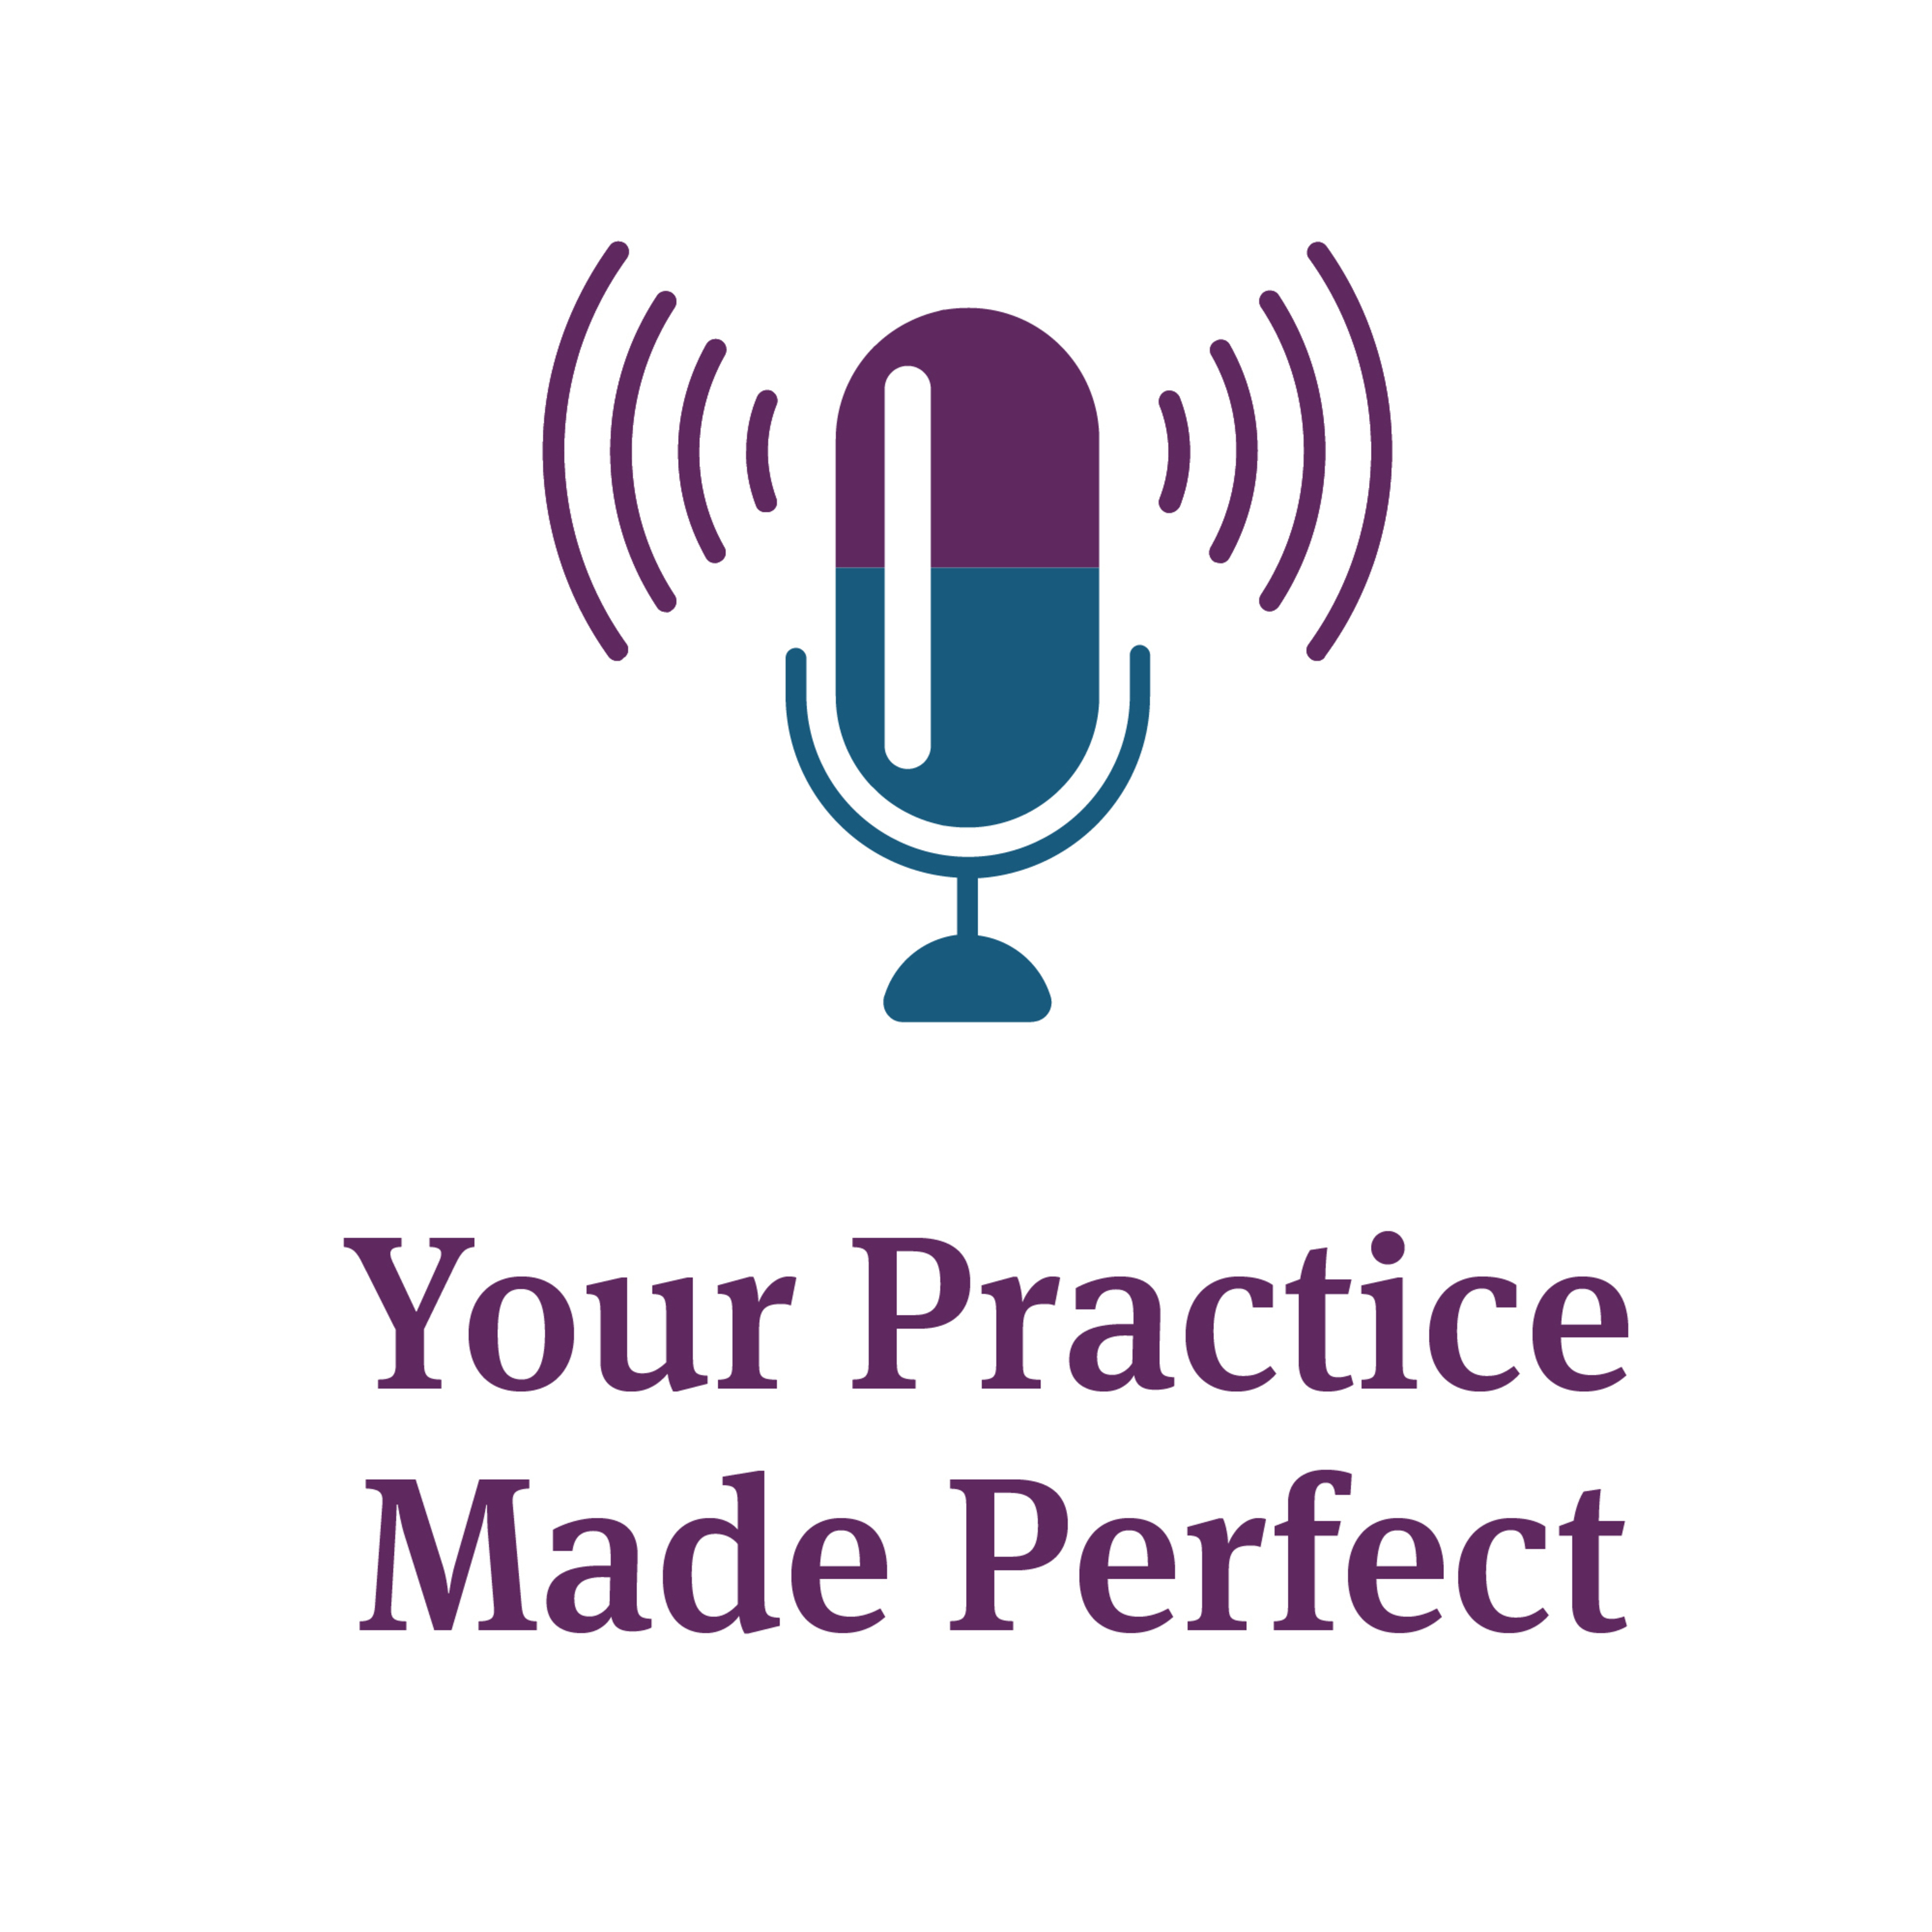 Your Practice Made Perfect